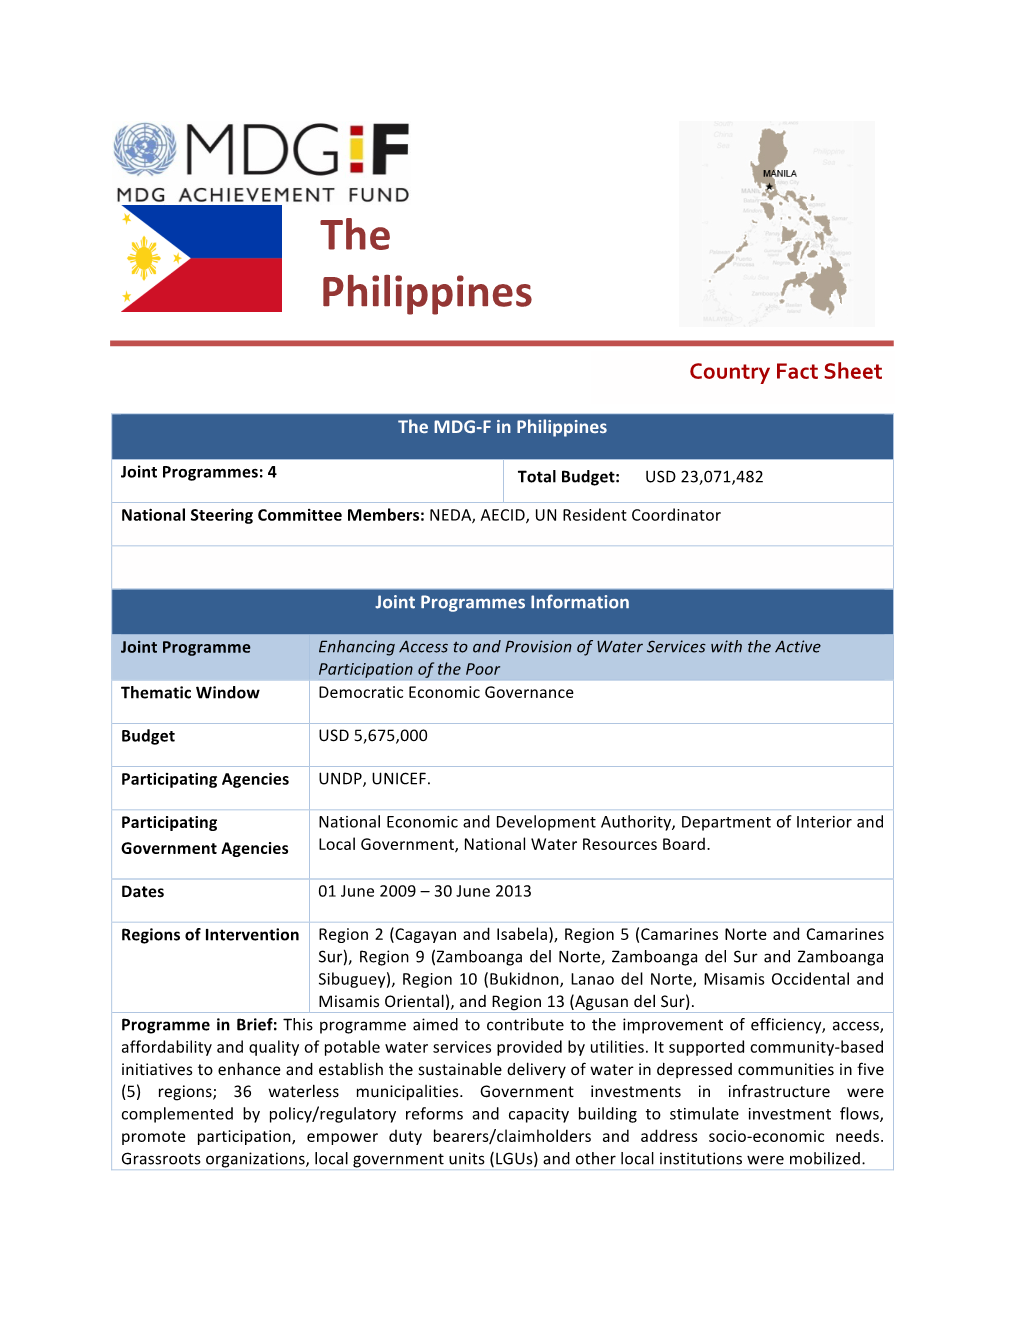 The Philippines’ Institutional Capacity to Adapt to Climate Change” Thematic Window Environment and Climate Change